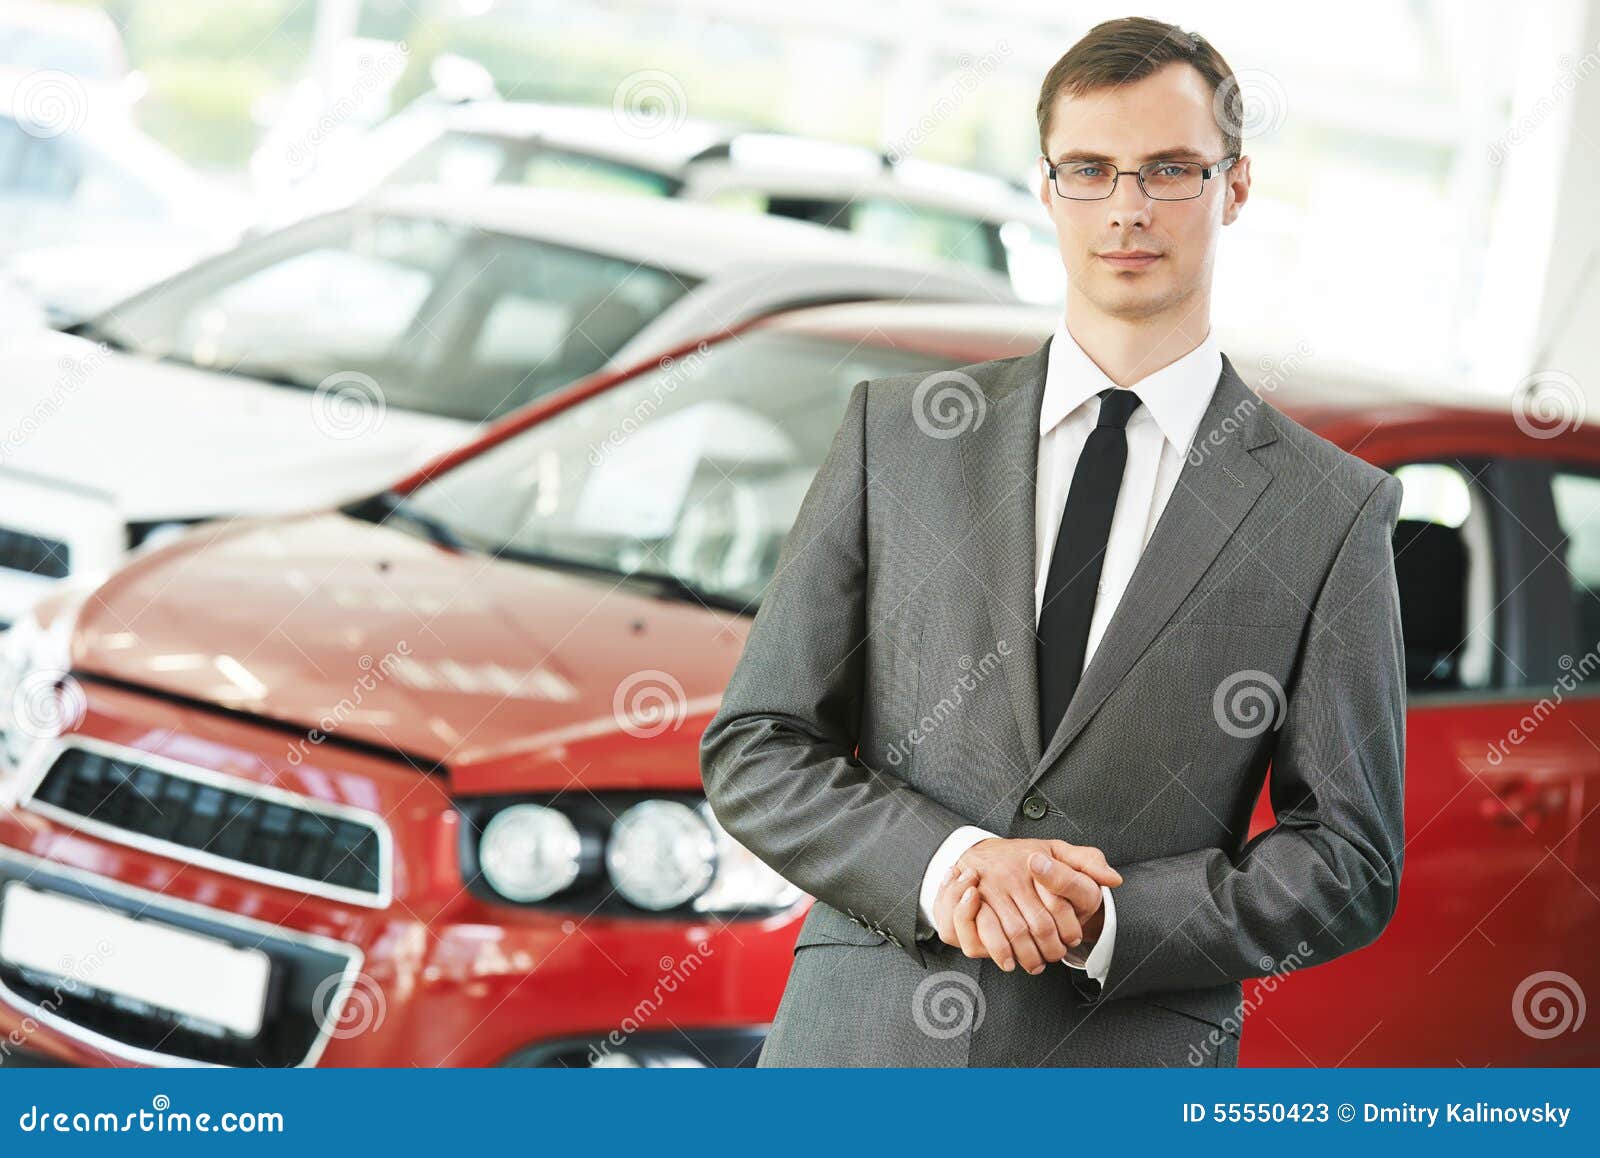 Automotive general sales manager jobs